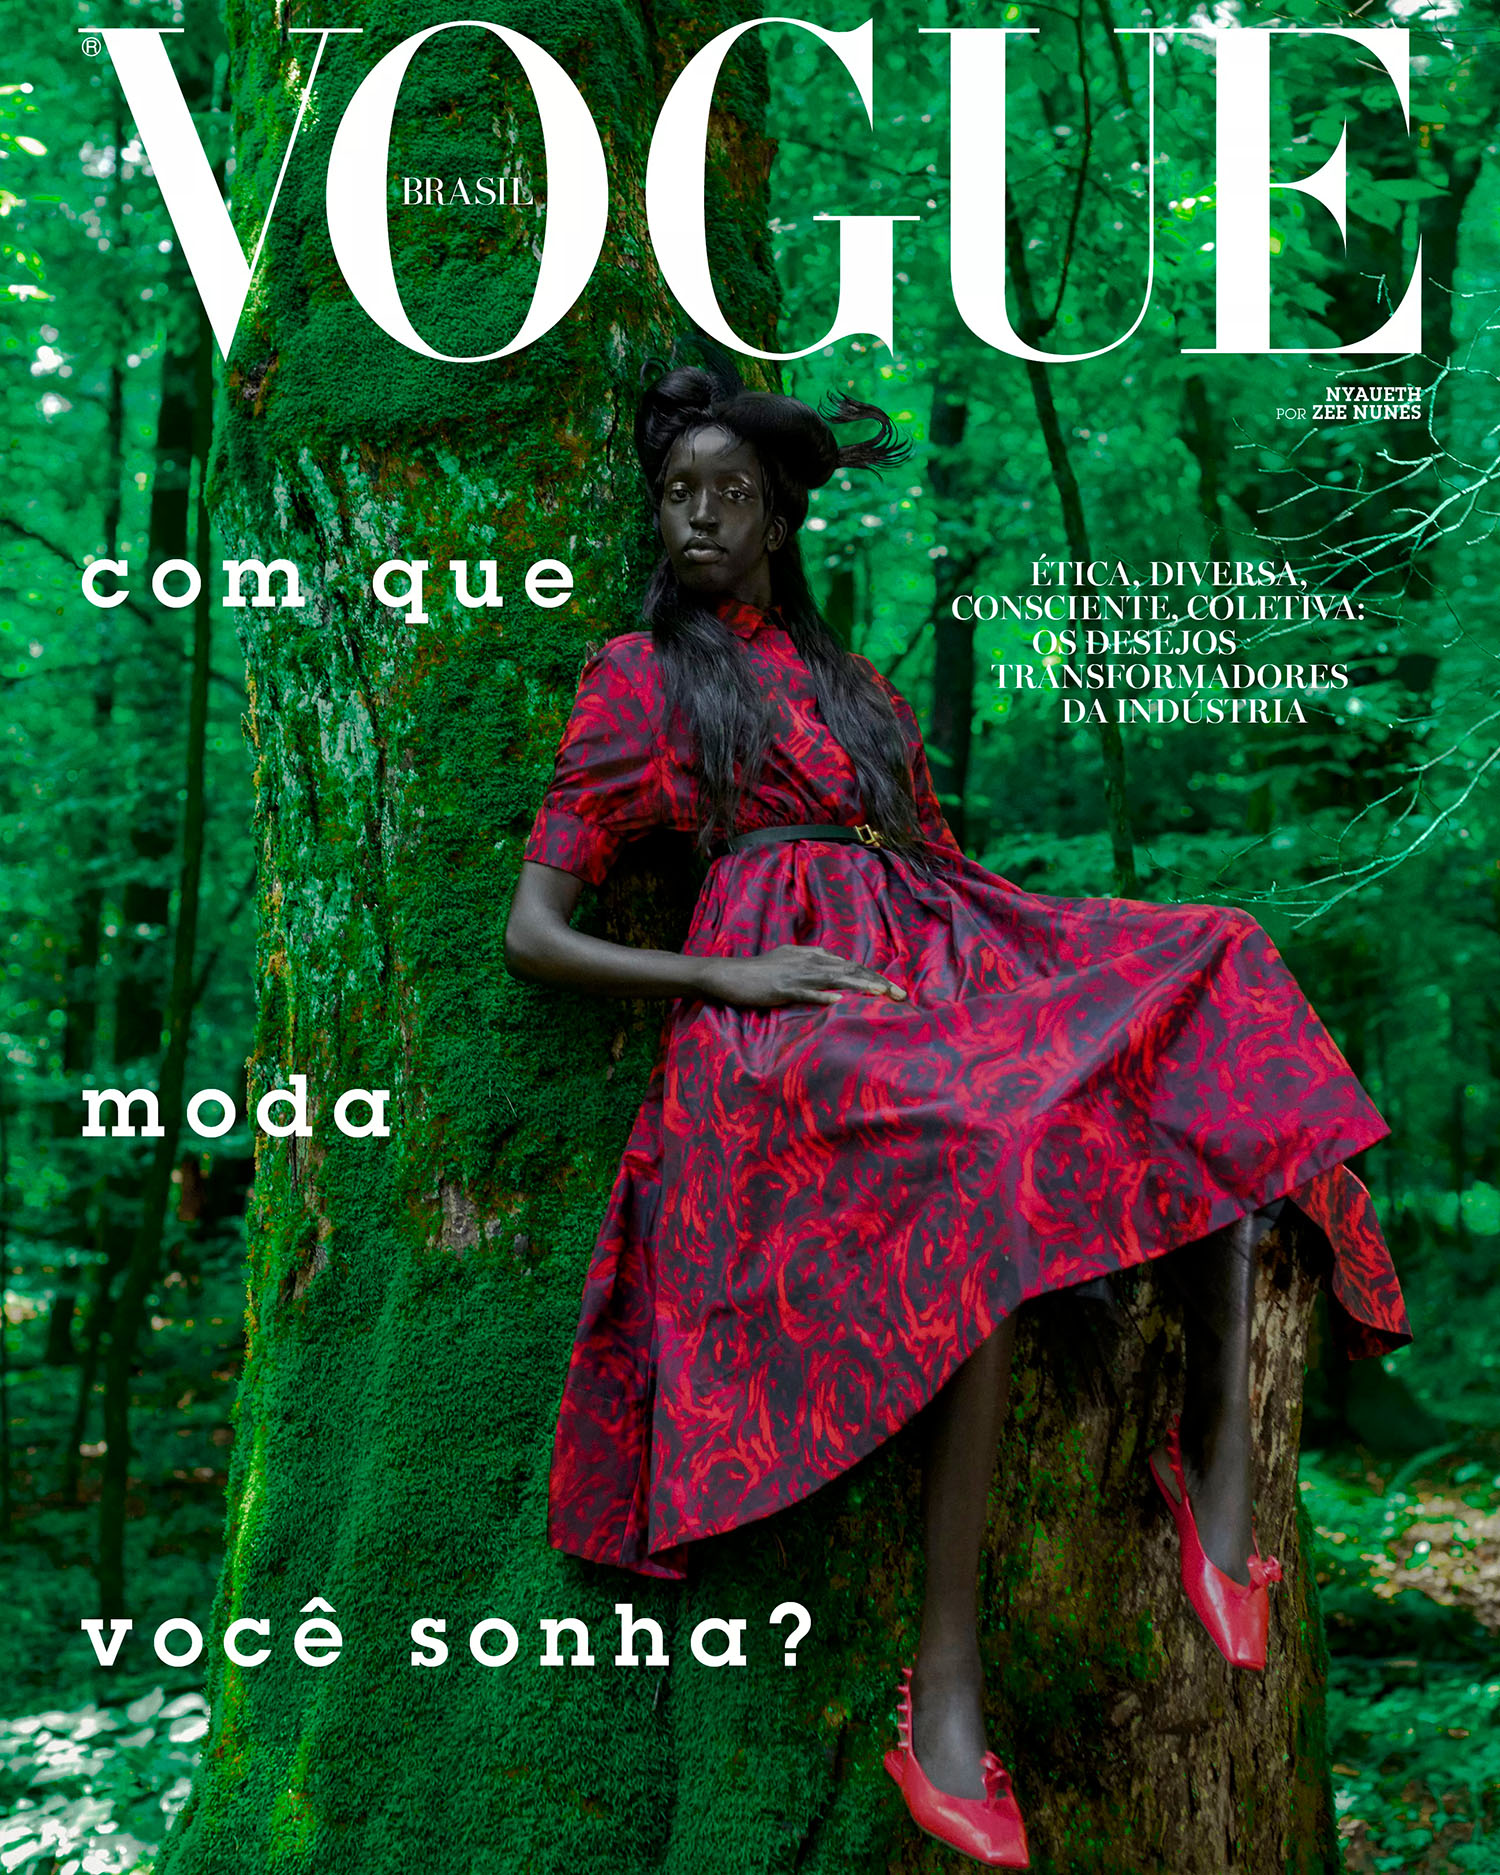 Nyaueth Riam covers Vogue Brazil August 2021 by Zee Nunes